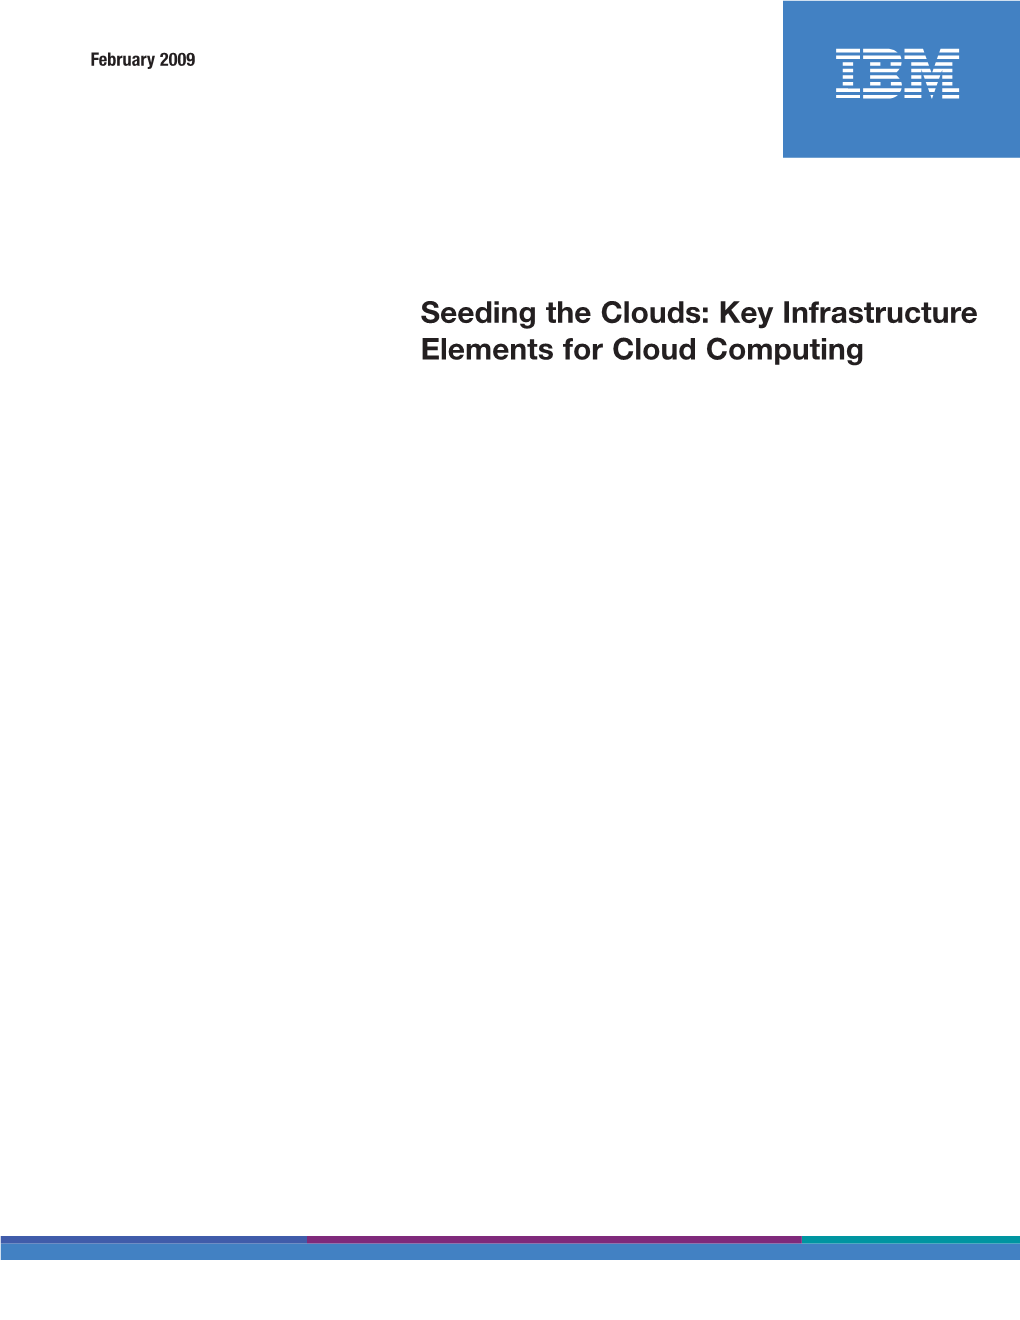 Seeding the Clouds: Key Infrastructure Elements for Cloud Computing Seeding the Clouds: Key Infrastructure Elements for Cloud Computing Page 2